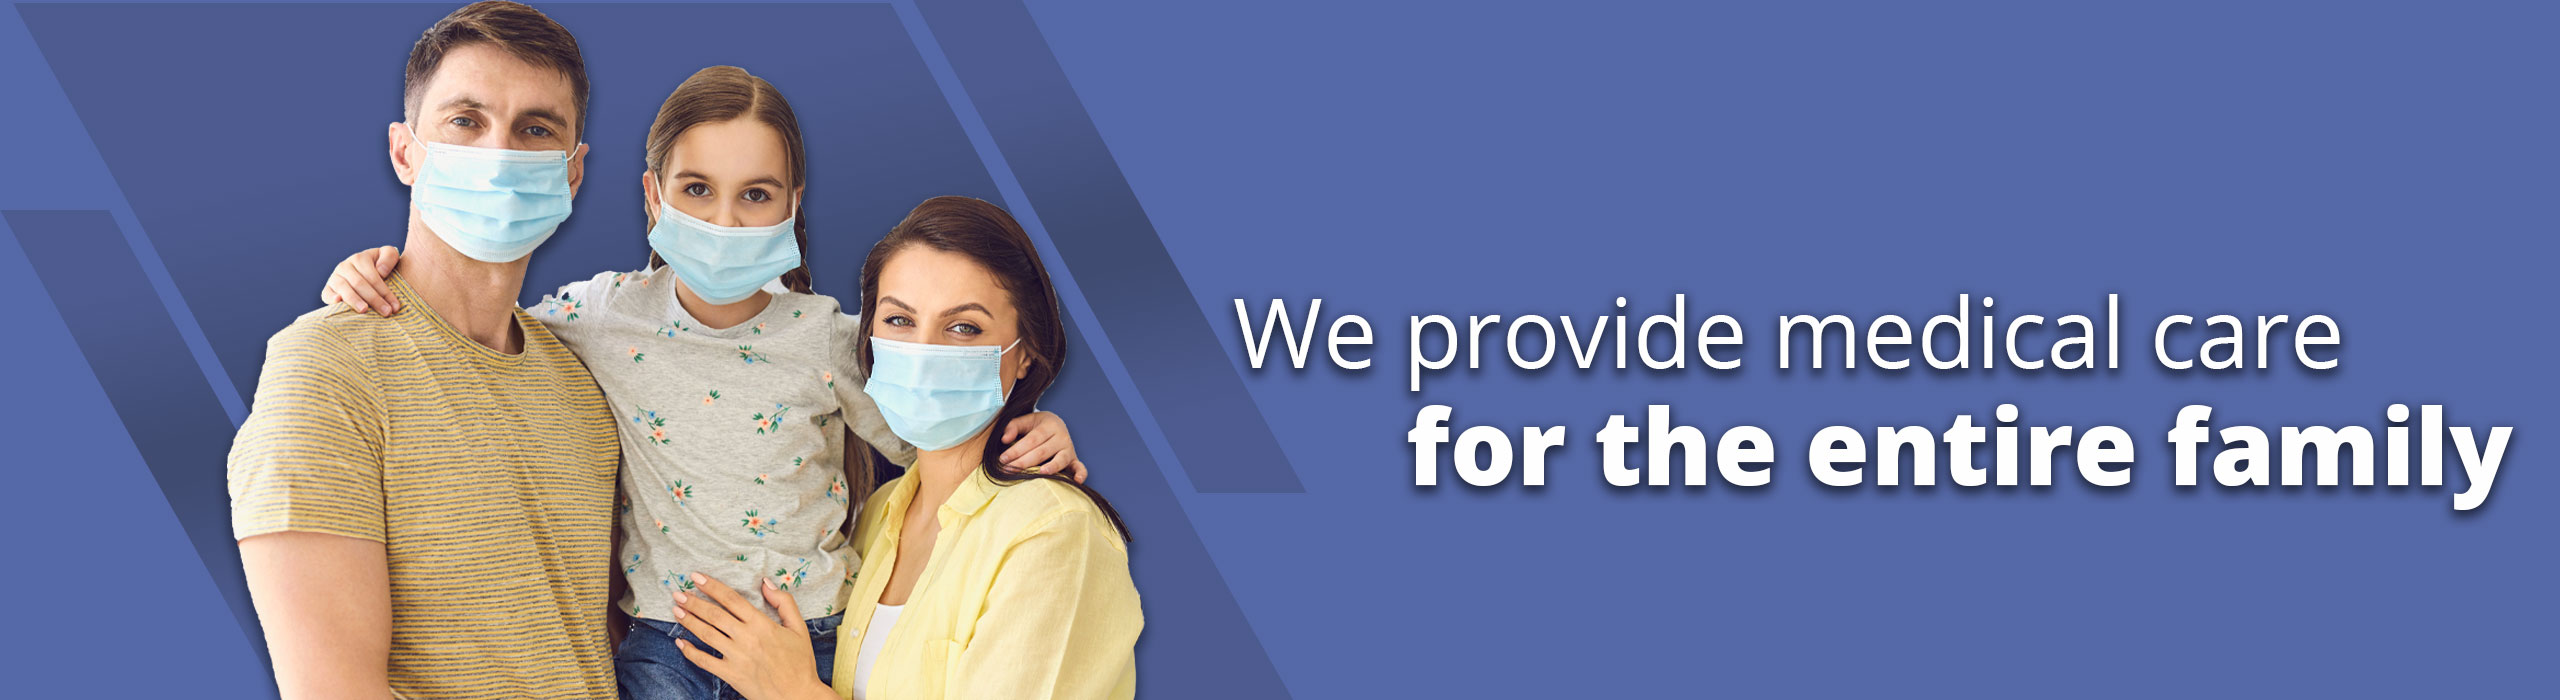 Banner picture of a man, his wife, and their little girl looking at the camera and wearing mask. Banner says:

We provide medical care for the entire family